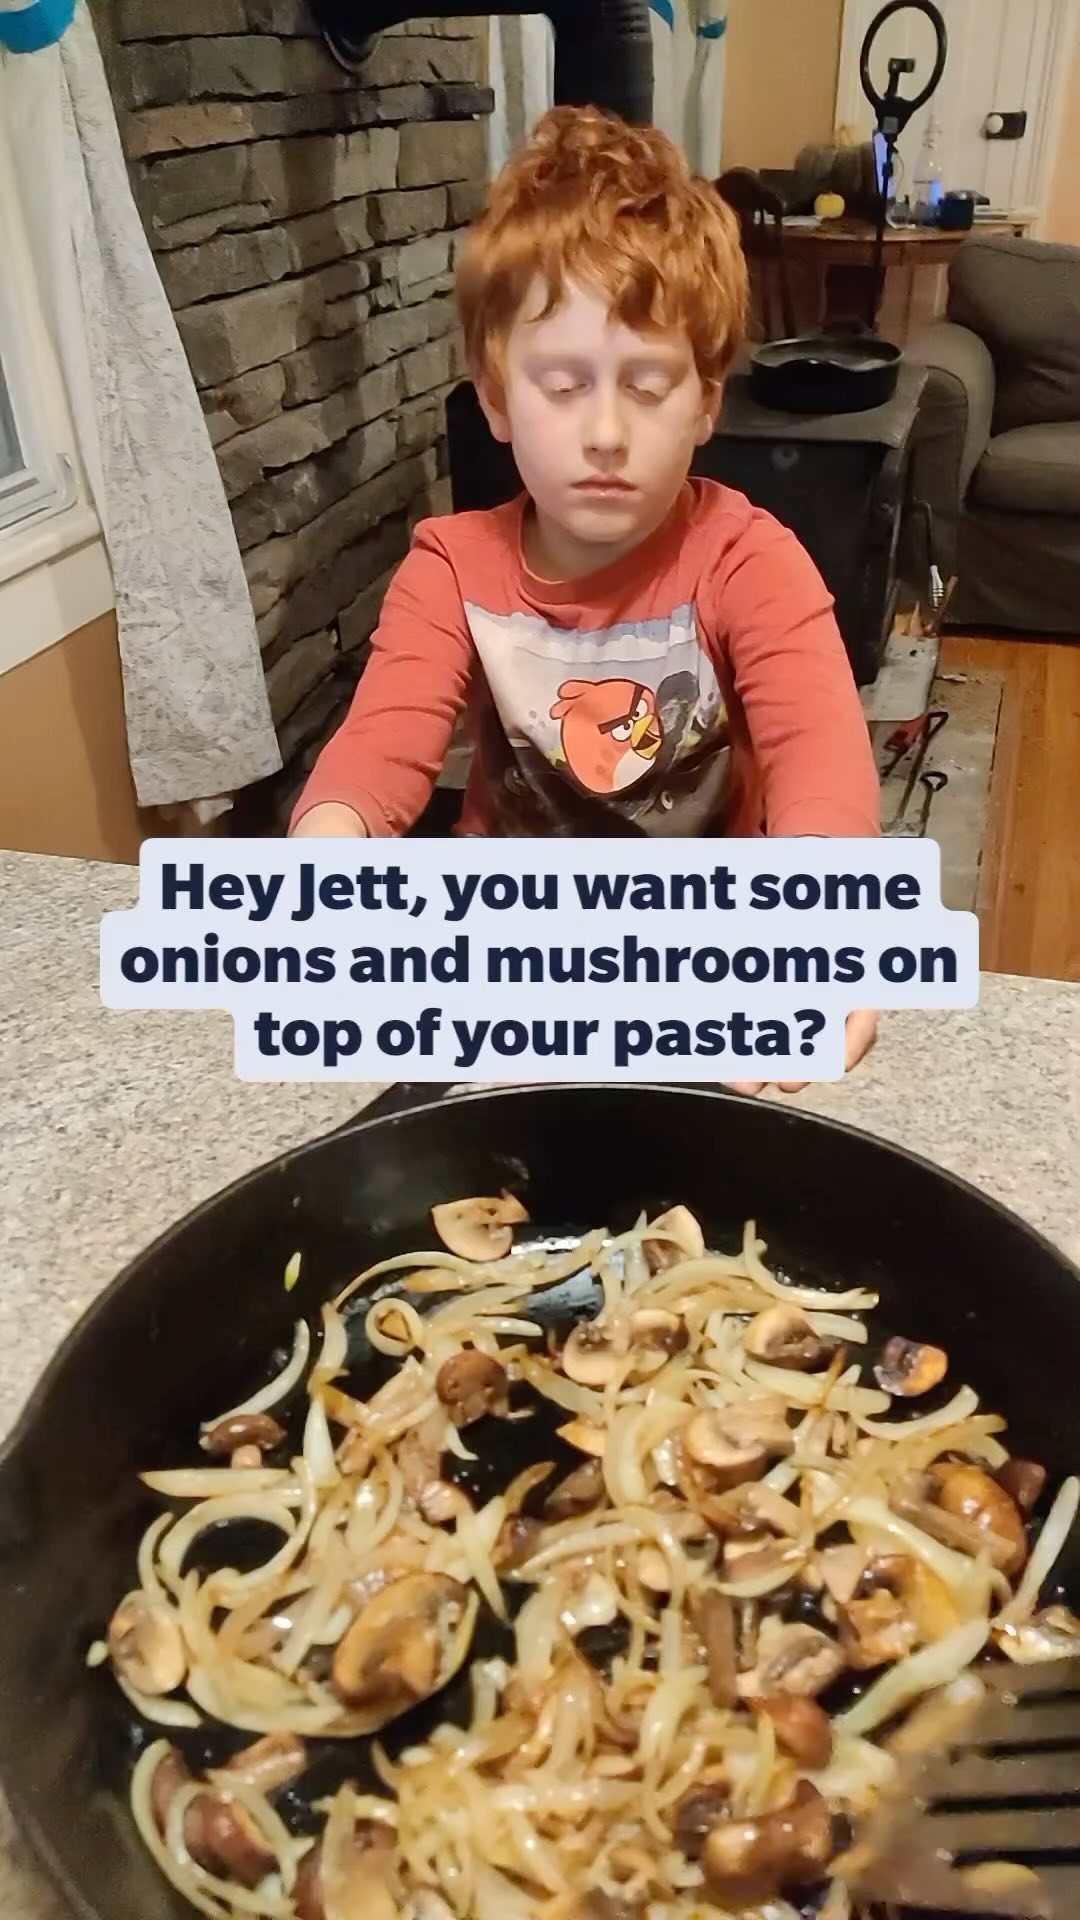 How to get your kids to eat more veggies, pt. 5